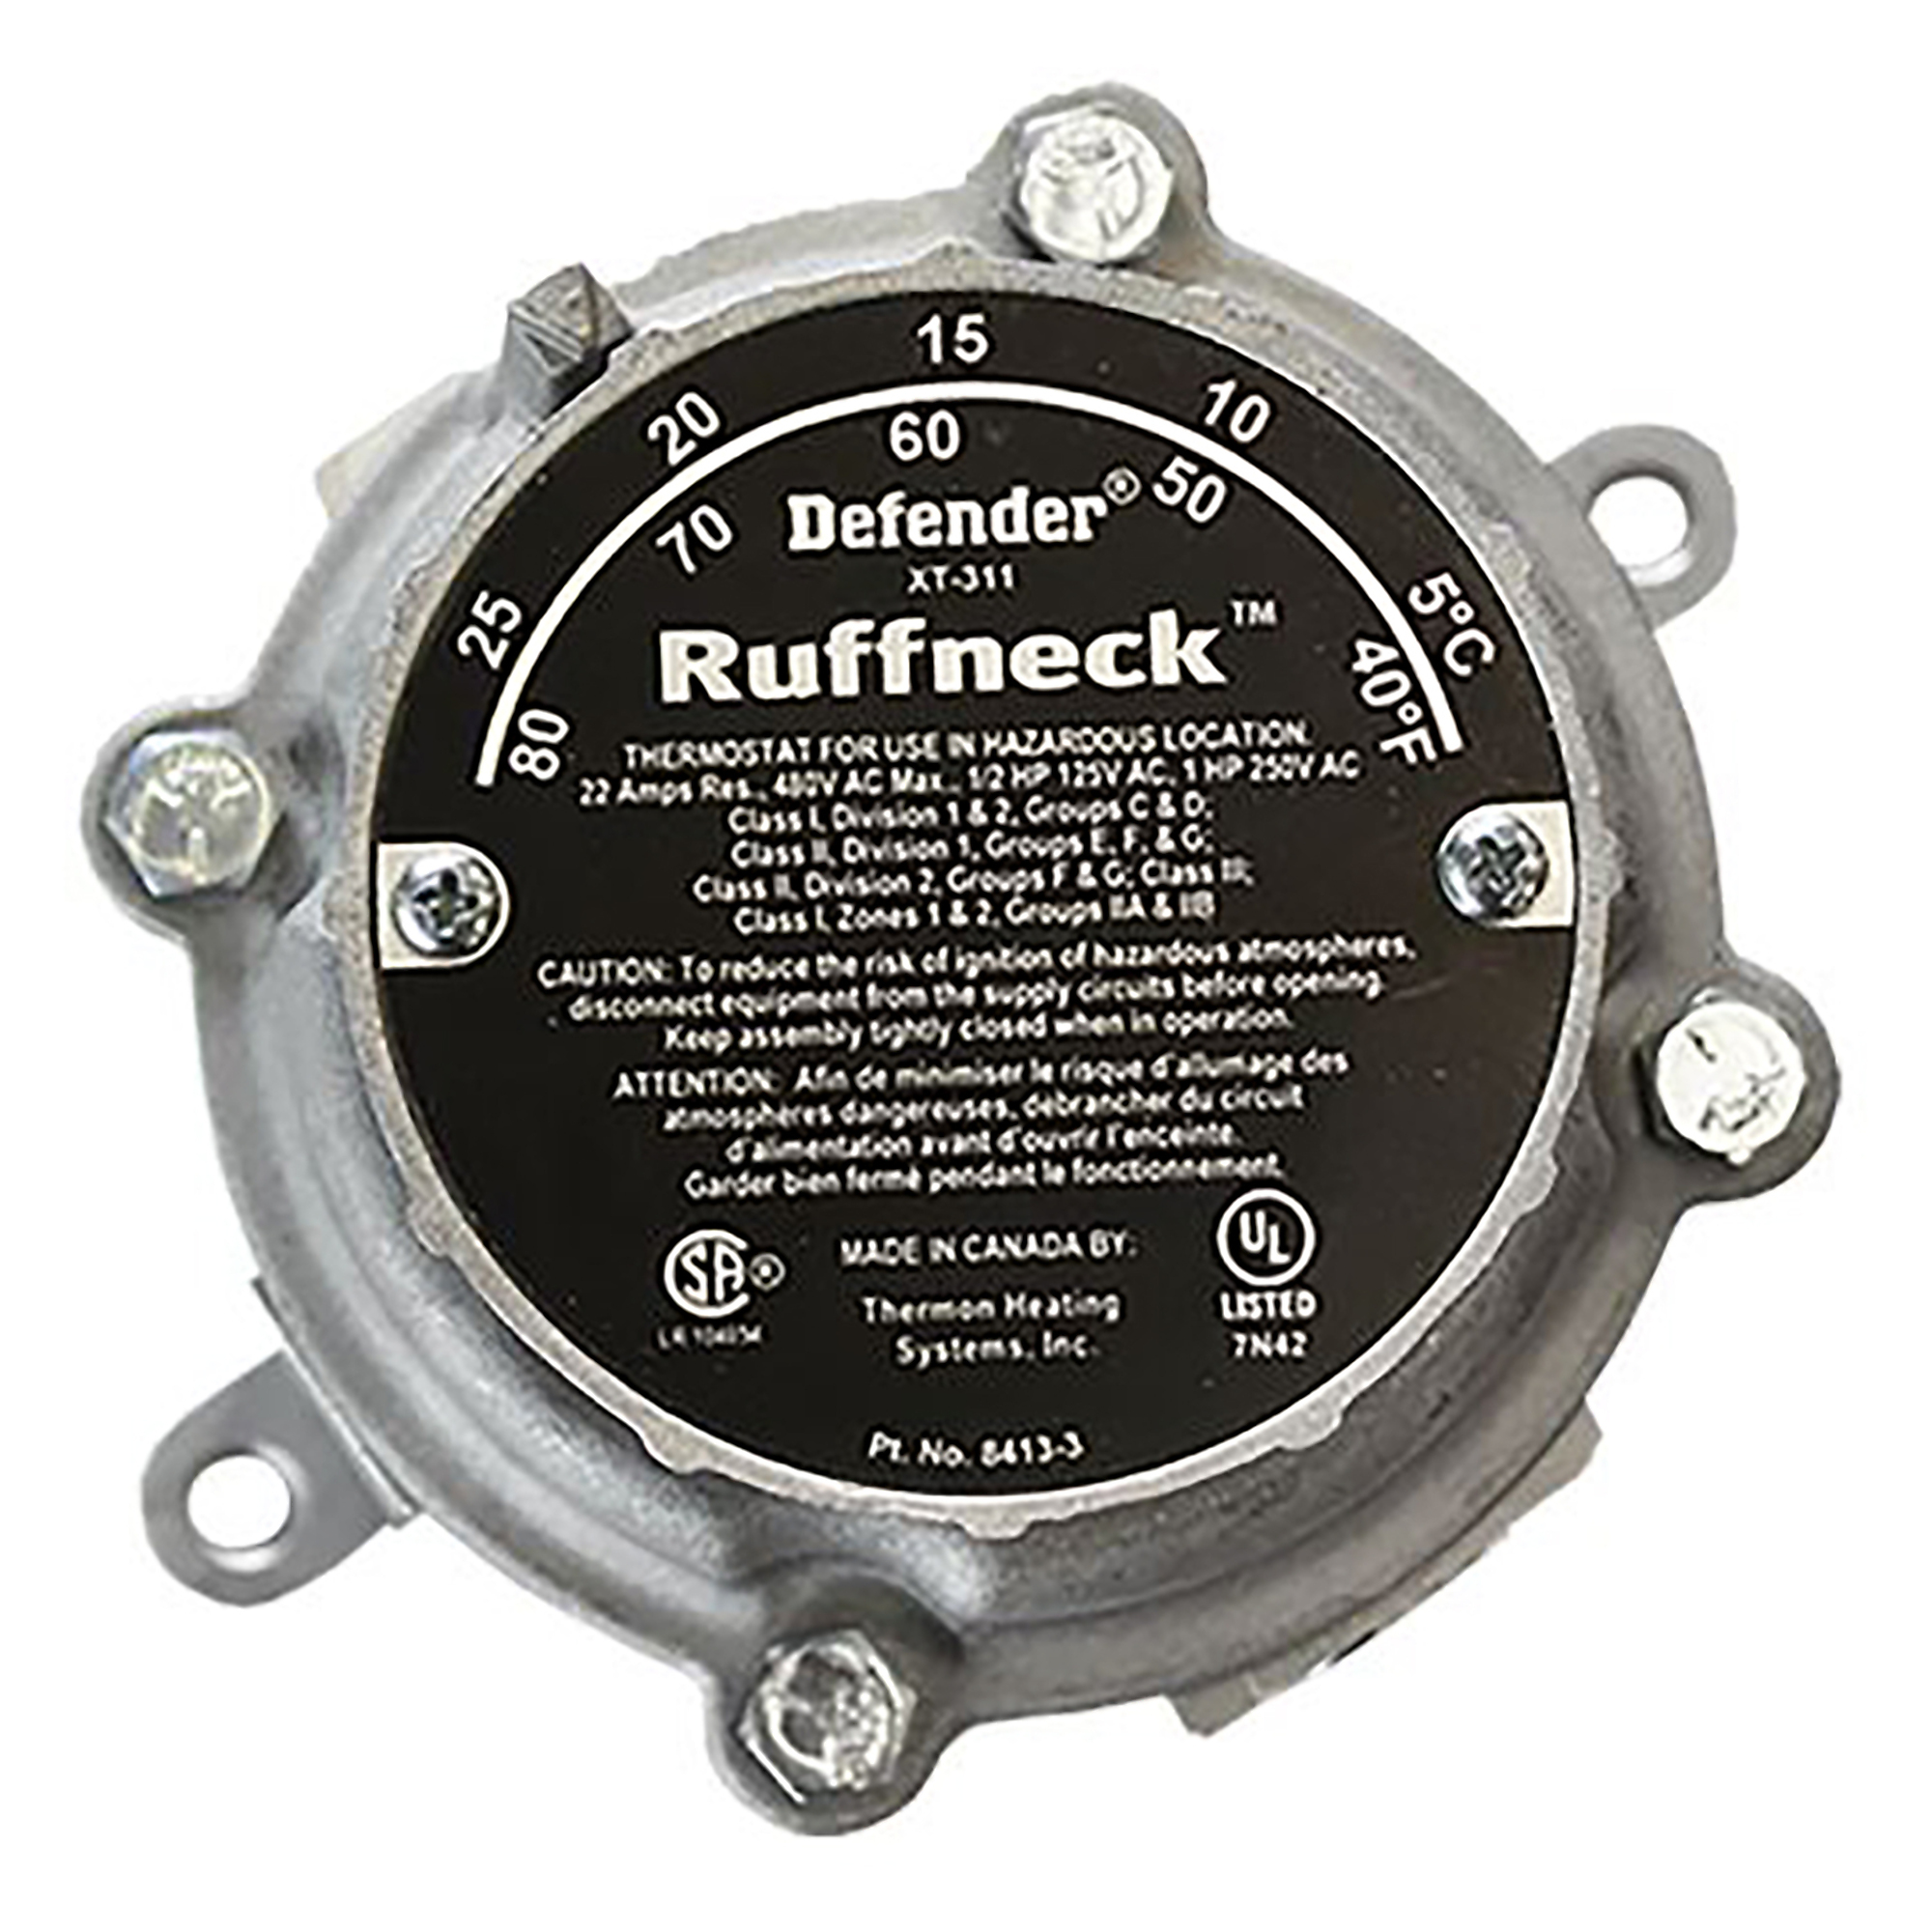 Ruffneck, Explosion-Proof SPST Thermostat, Heat Type Forced Air, Heat Output 0 Btu/hour, Model XT-311